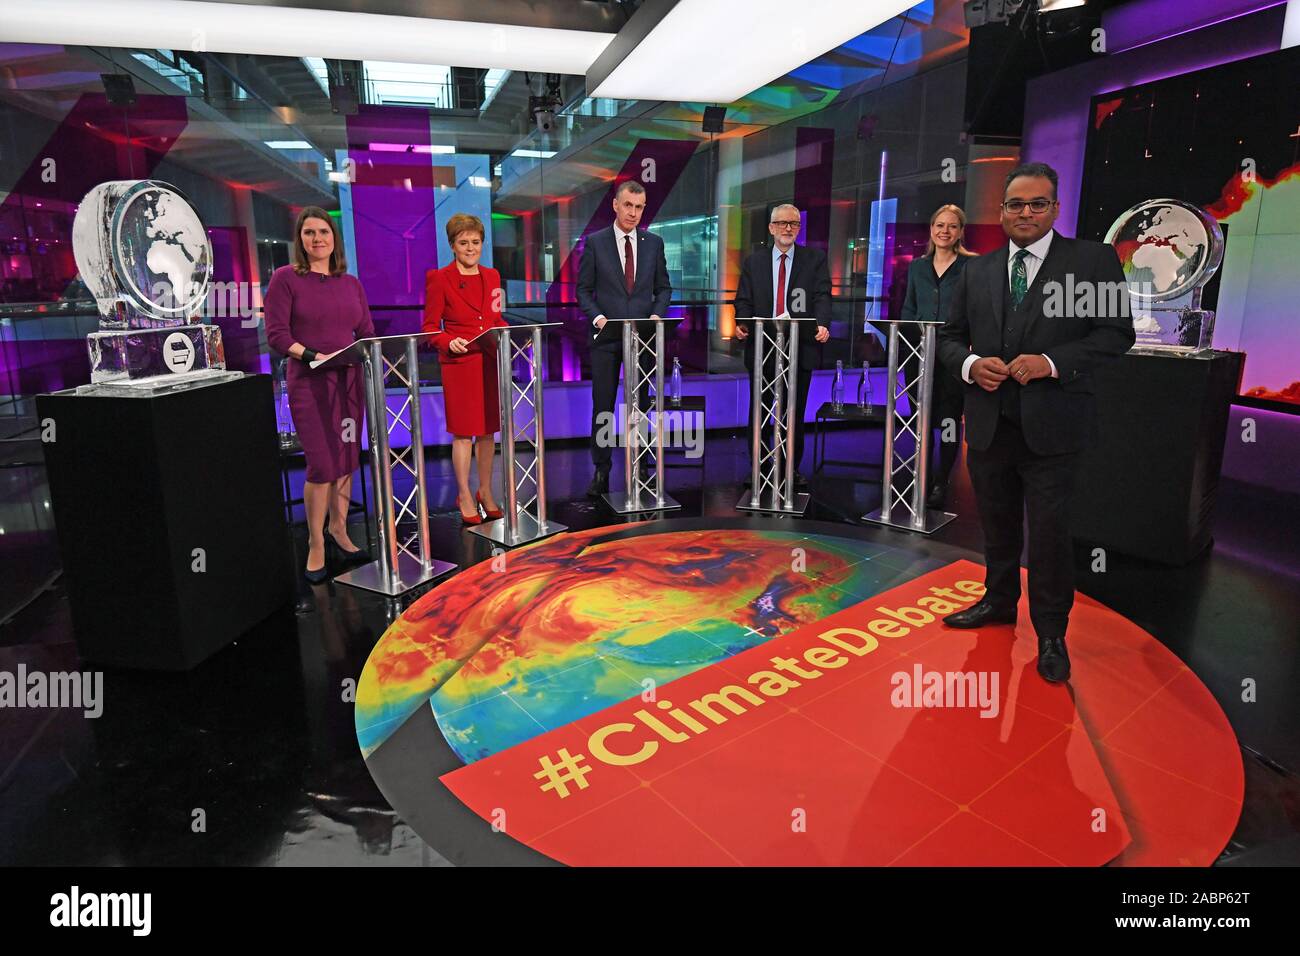 Krishnan Guru-Murthy (foreground) with (rear left to right) Liberal Democrat leader Jo Swinson, SNP leader Nicola Sturgeon, Plaid Cymru leader Adam Price and Green Party Co-Leader Sian Berry, standing next to ice sculptures representing the Brexit Party and Conservative Party who didn't appear at the event, before the start of the Channel 4 News' General Election climate debate at ITN Studios in Holborn, central London. Stock Photo